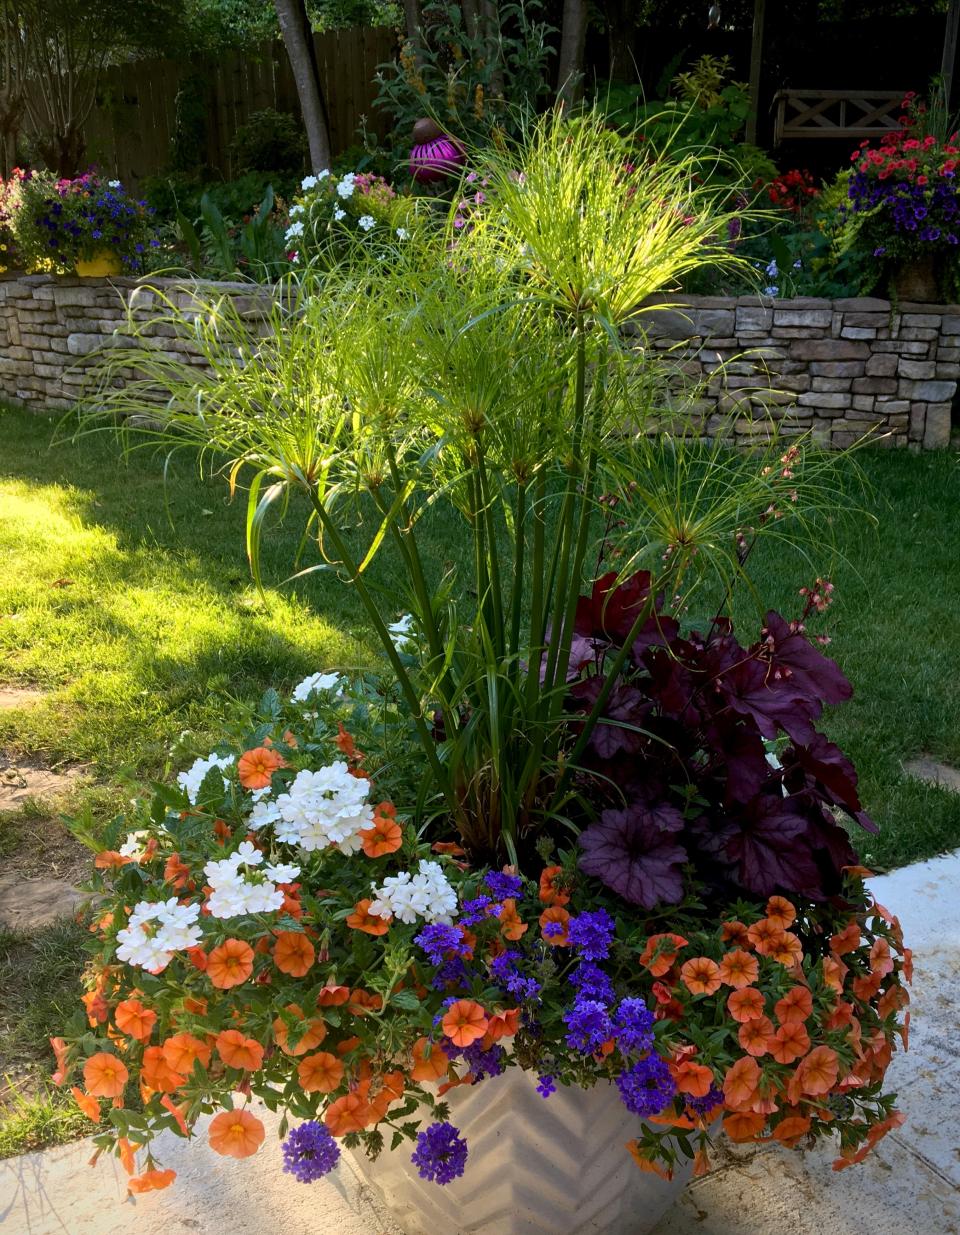 The late afternoon sun lights up the curly tufts of Graceful Grasses Prince Tut papyrus, grown here in a white self-watering AquaPot with Primo Wild Rose heuchera, Superbells Dreamsicle calibrachoa and Superbena Whiteout and Superbena Royale Chambray verbenas.